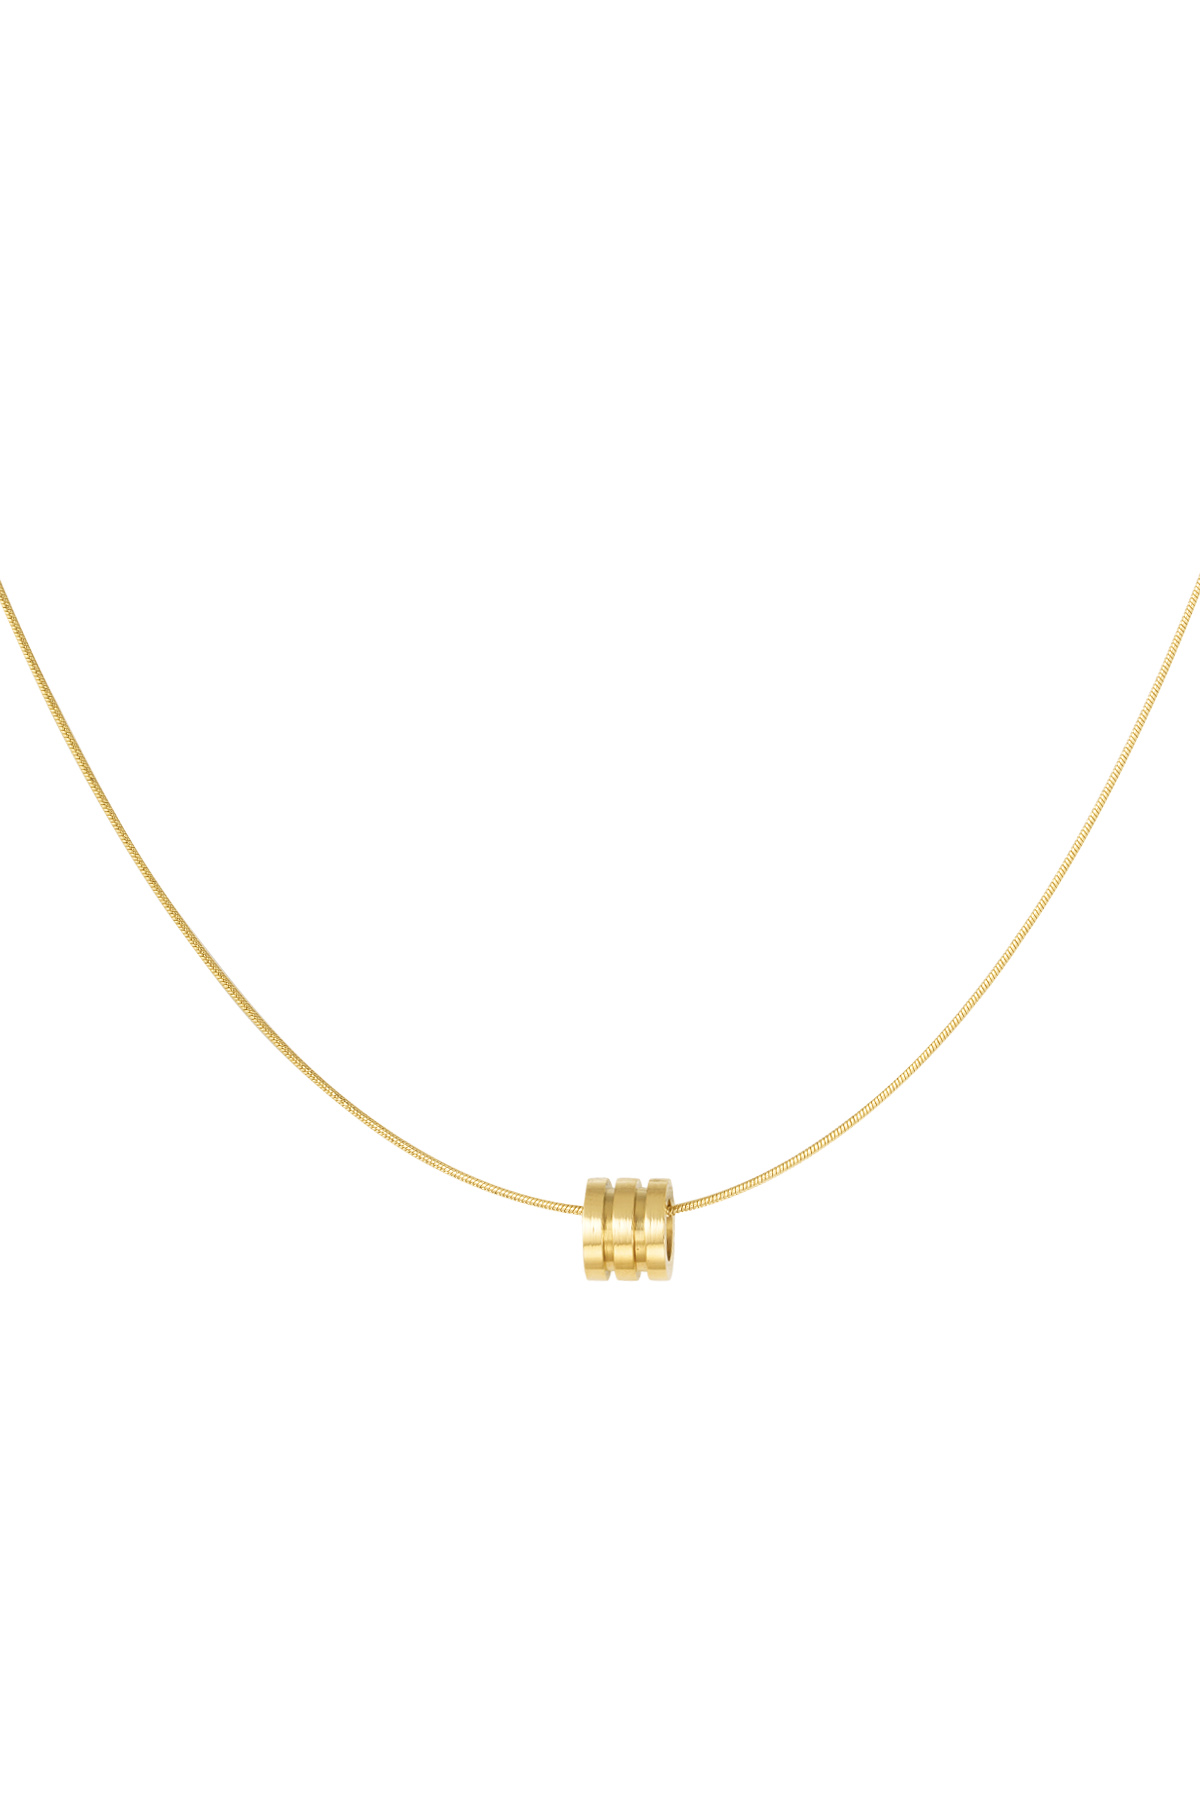 Necklace three-layer charm - gold h5 